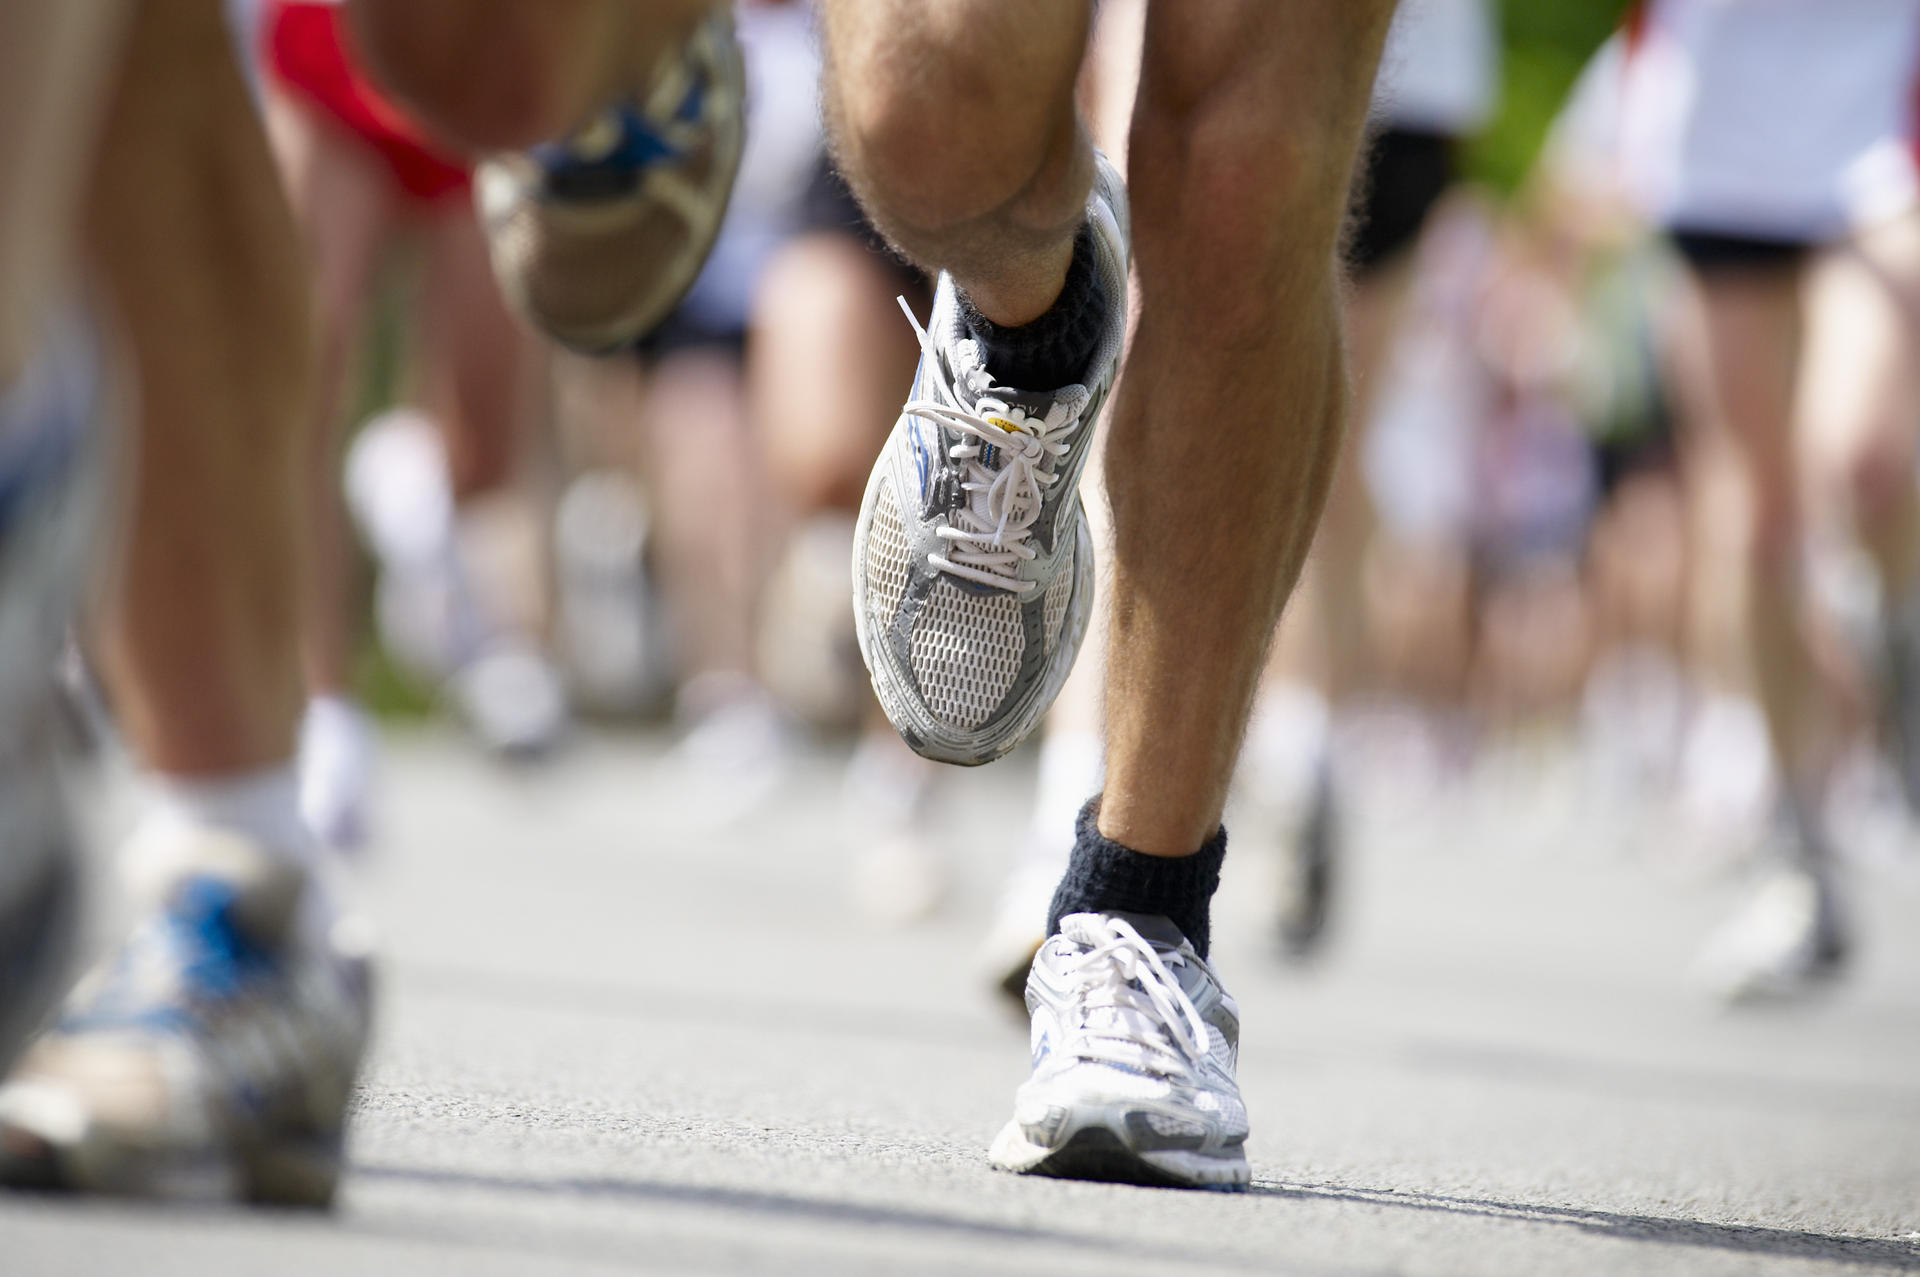 Sprained ankles need plenty of rest to recover. Photo: Corbis